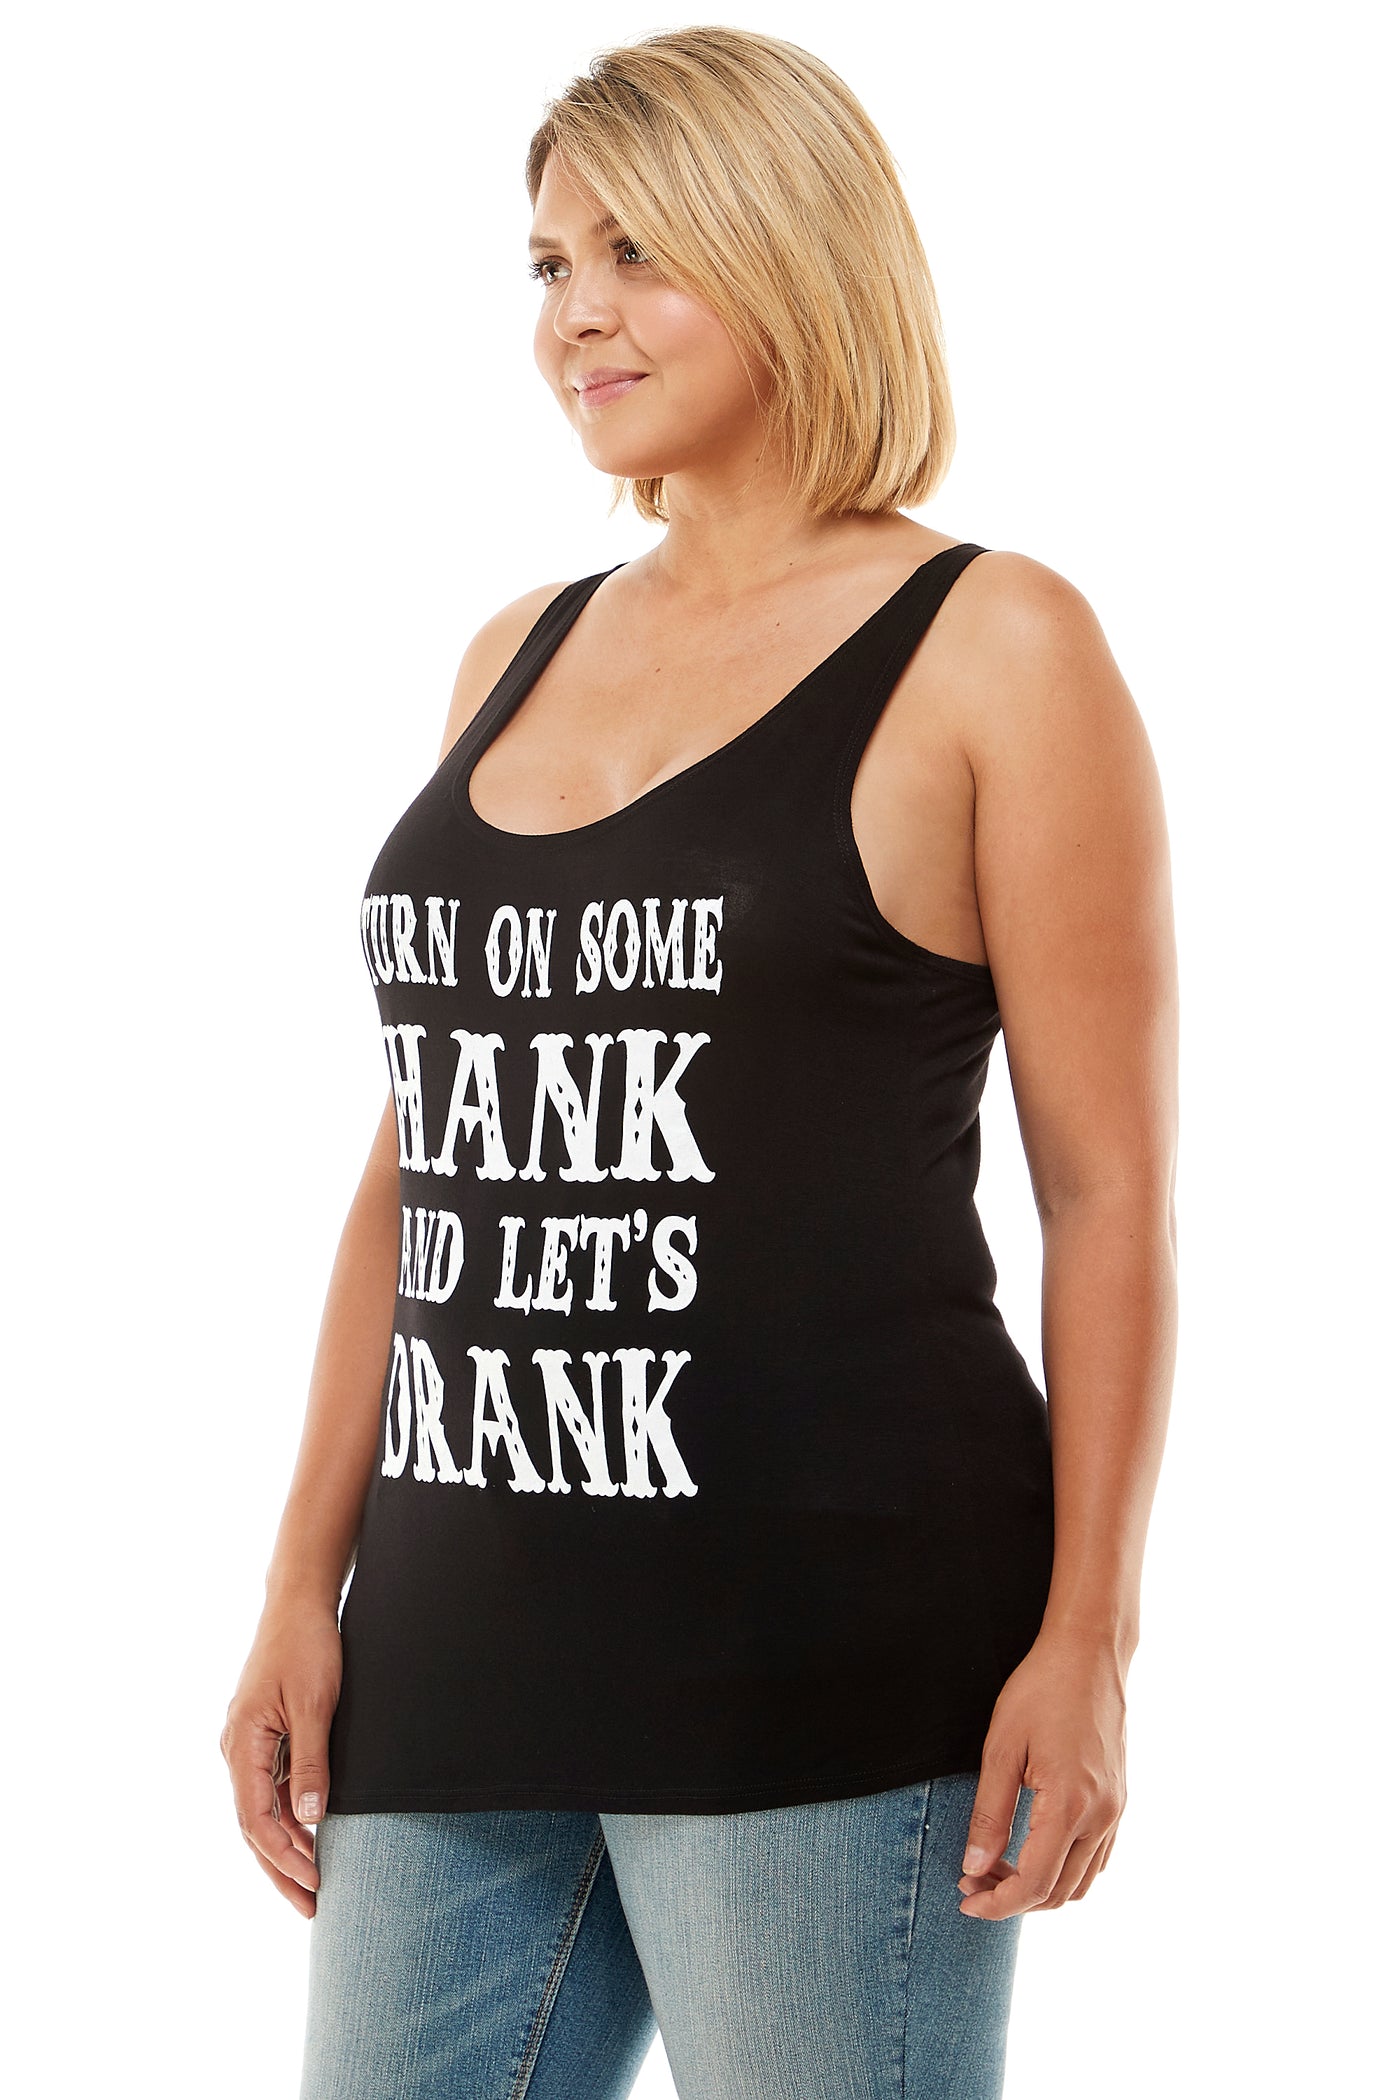 TURN ON SOME HANK AND LET'S DRANK TANK TOP - Trailsclothing.com